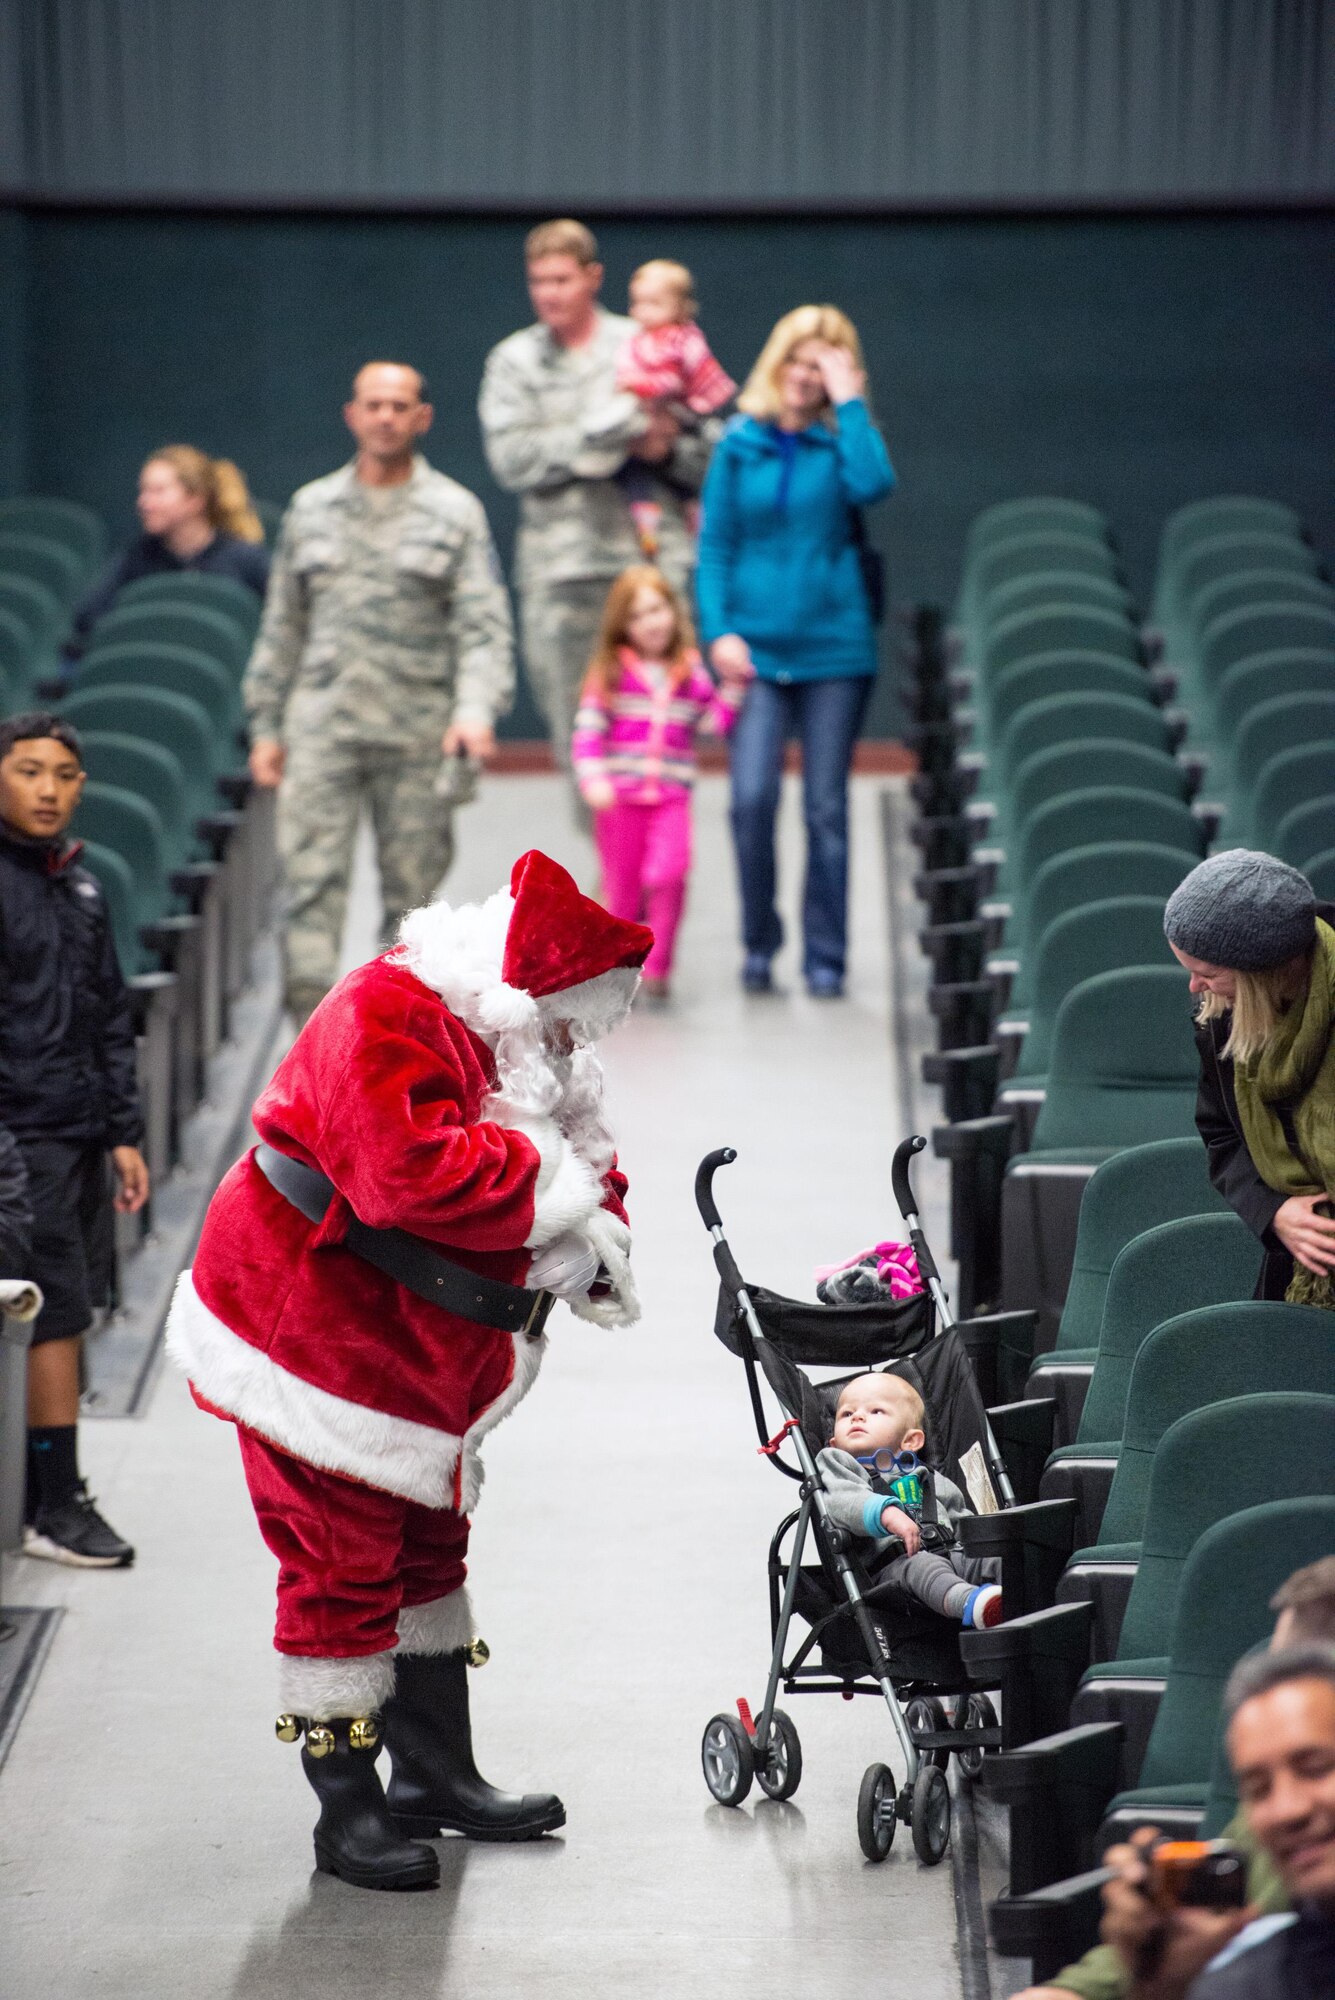 Santa Claus makes an appearance during the annual holiday tree lighting ceremony at Travis Air Force Base, Calif., Dec. 8, 2016. Patrons were treated to music by the U.S. Air Force Band of the Golden West Quartet, a visit from Santa and refreshments. (U.S. Air Force photo/Louis Briscese)